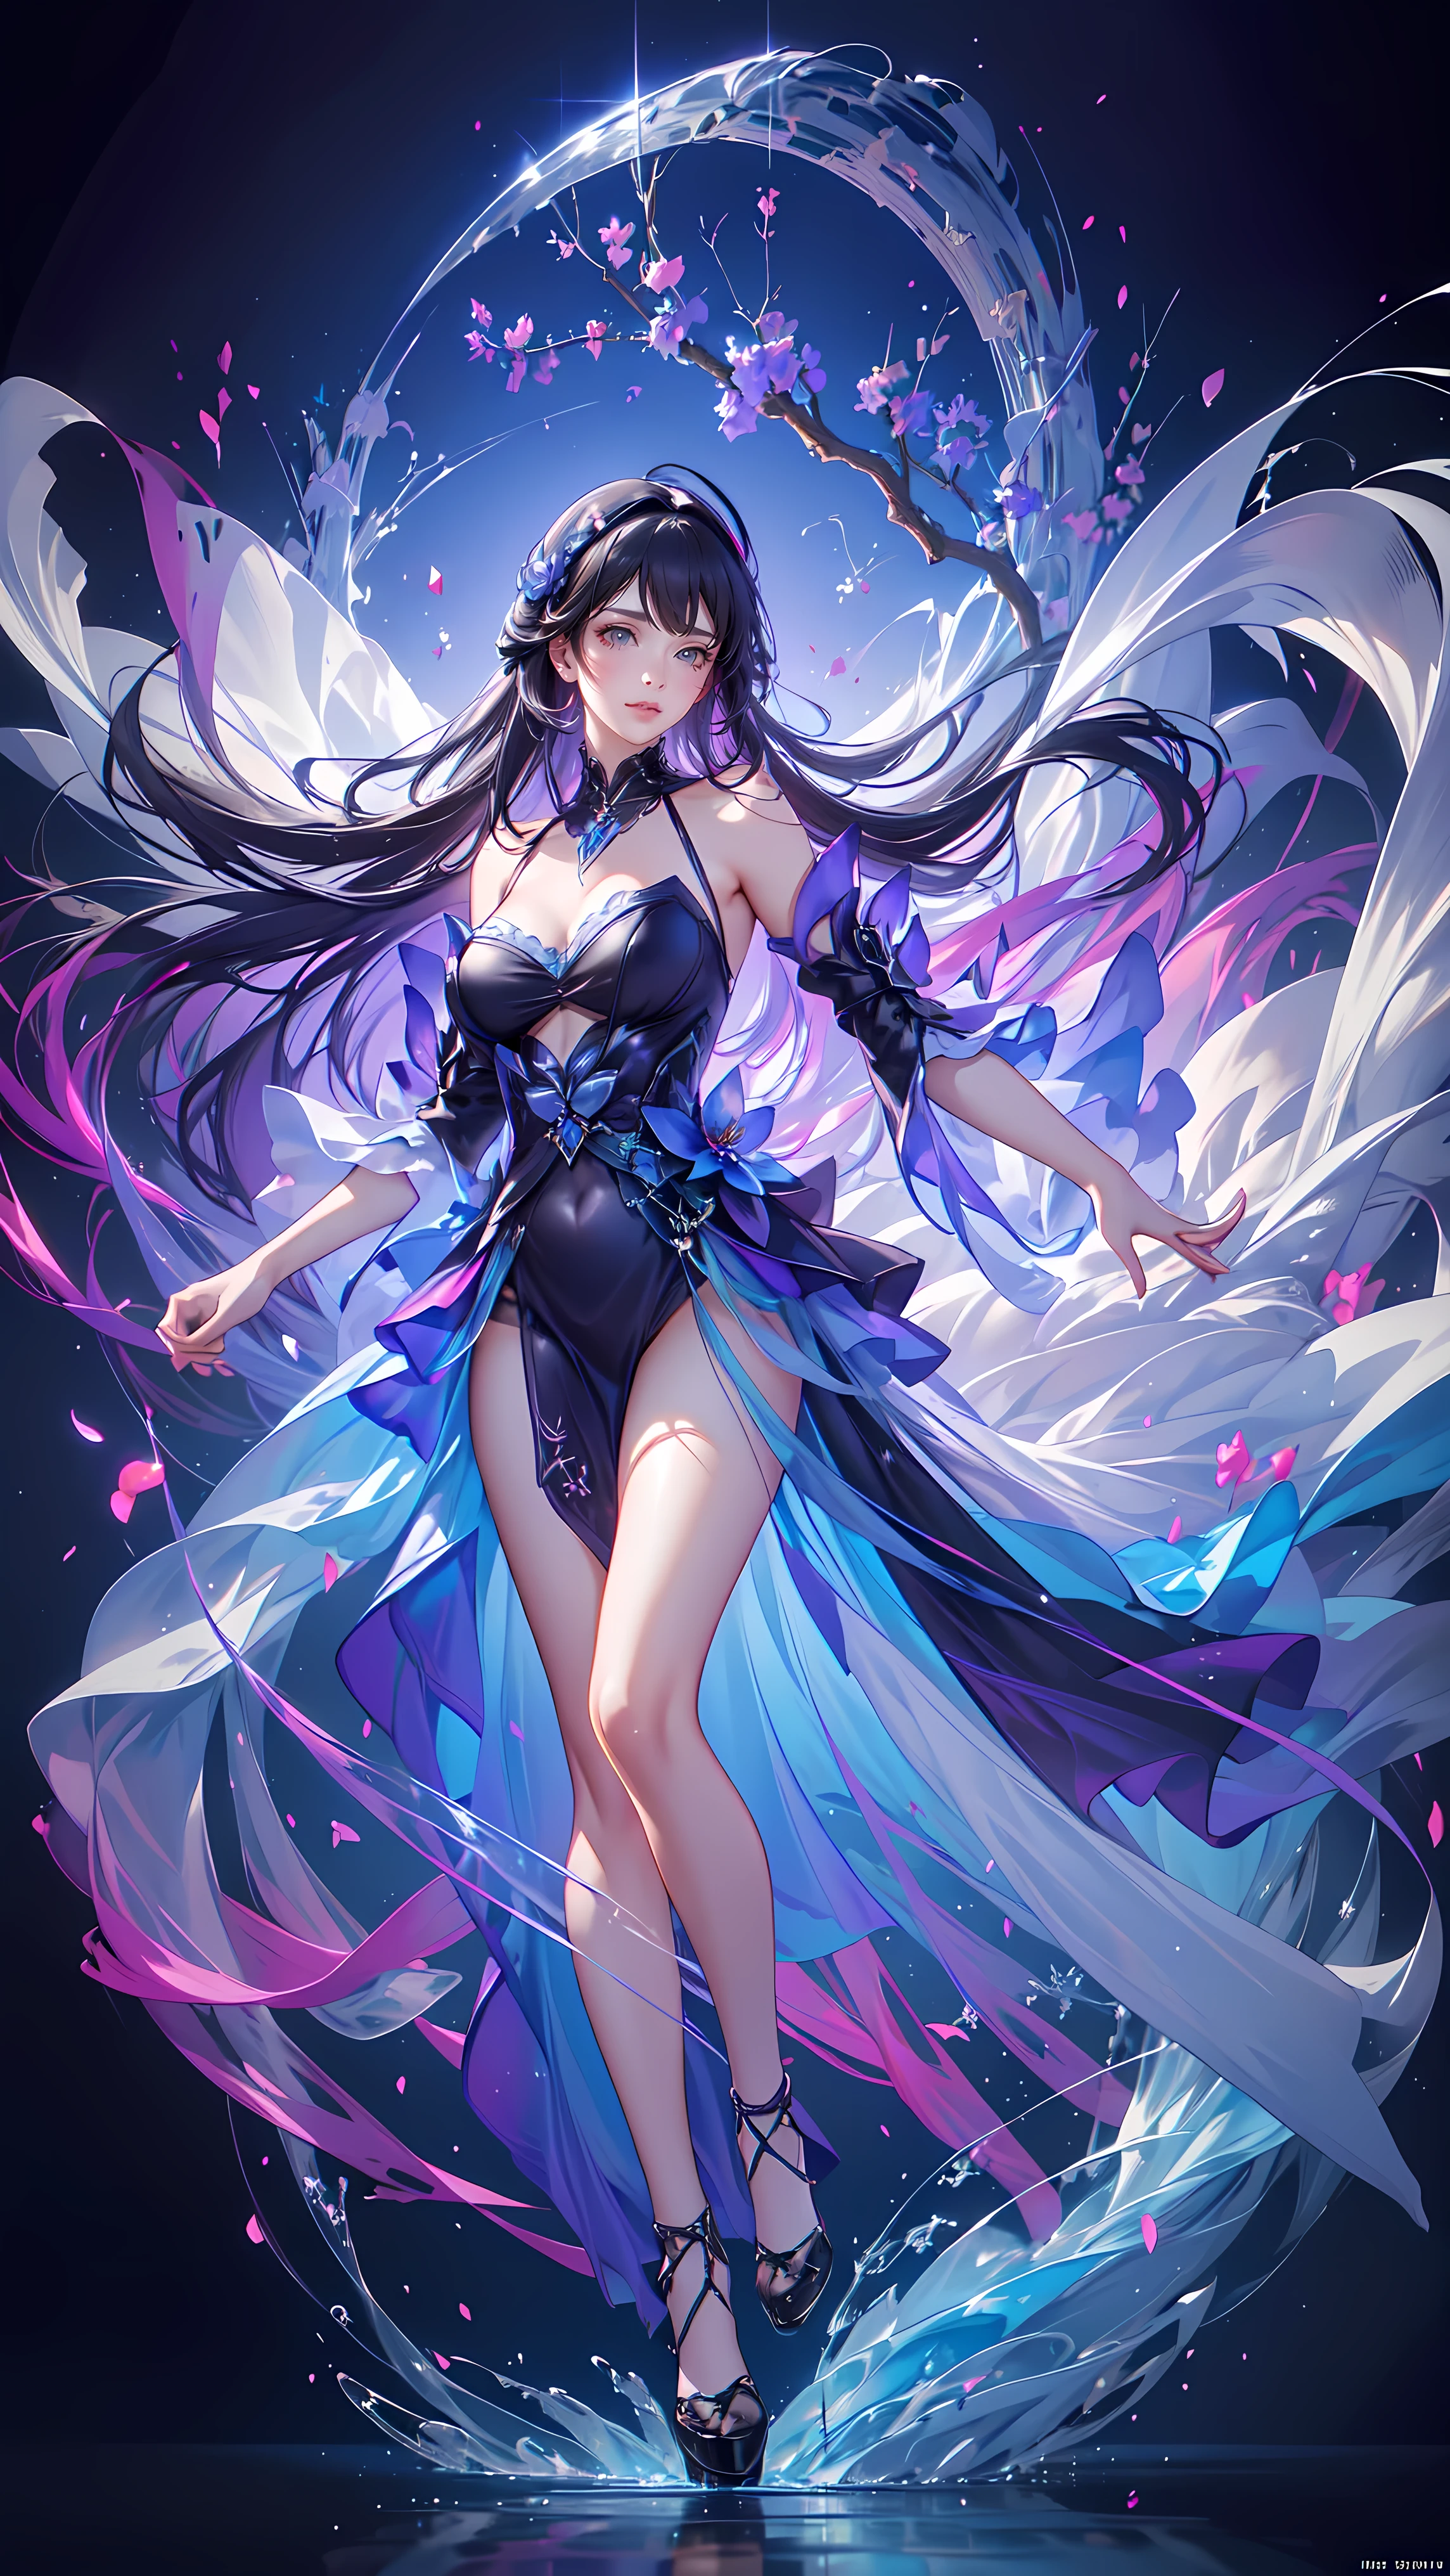 (((FULL BODY POSE))) (((SHOW PANTIES))) (((BIG GIANT BOOBS))) ((ANATOMY CORRECTED)) ((RED BLUE  LUXURY ARISTOCRATIC NOBLE COSTUME)) | A WOMEN WEAR ((SEXY OUTFIT)) ((BLUE LONG HAIR WITH RED HIGHLIGHT)) FLOATING IN THE ((BLUE SKY BACKGROUND)) ((FLOWER PETALS FAILING BACKGROUND IS A BLUE SKY)))) HORIZON PLANET FULL OF (((STARS))) | big eyes, ((big boobs)) sexy pose, big thigh, full body, large breasts, open legs, show panties, smile, portrait knights of zodiac, extremely detailed ((pixiv arts)), high detailed official artwork, [ tarot card ]!!!!!, detailed key anime art, knights of zodiac anime, beautiful celestial mage, firefly from honkai star rails, full body | (dynamic angle:1.1), outline, ((thick line art)), cover, stylish, official art, (details:1.2), (fantasy), garden, (bloom:1.1), glow:0.2, shadow, nature, flower, splash water, crystal, snowflakes, particles, bokeh, anamorphic light (depth of field), sharp focus, (volumetric lighting), (bokeh:0.6), film grain:0.4, (soft lighting:1.1) (VIGNETTE:1) | high-quality, ultra-detailed illustrations, ultra-high resolution, (high resolution, overwhelmingly pixel-perfect, luxurious illustration), (Ultra Quality, Masterpiece, Ethereal:1.4) photorealistic:.1.4, UHD (8k, RAW photo, best quality, masterpiece:1.2)